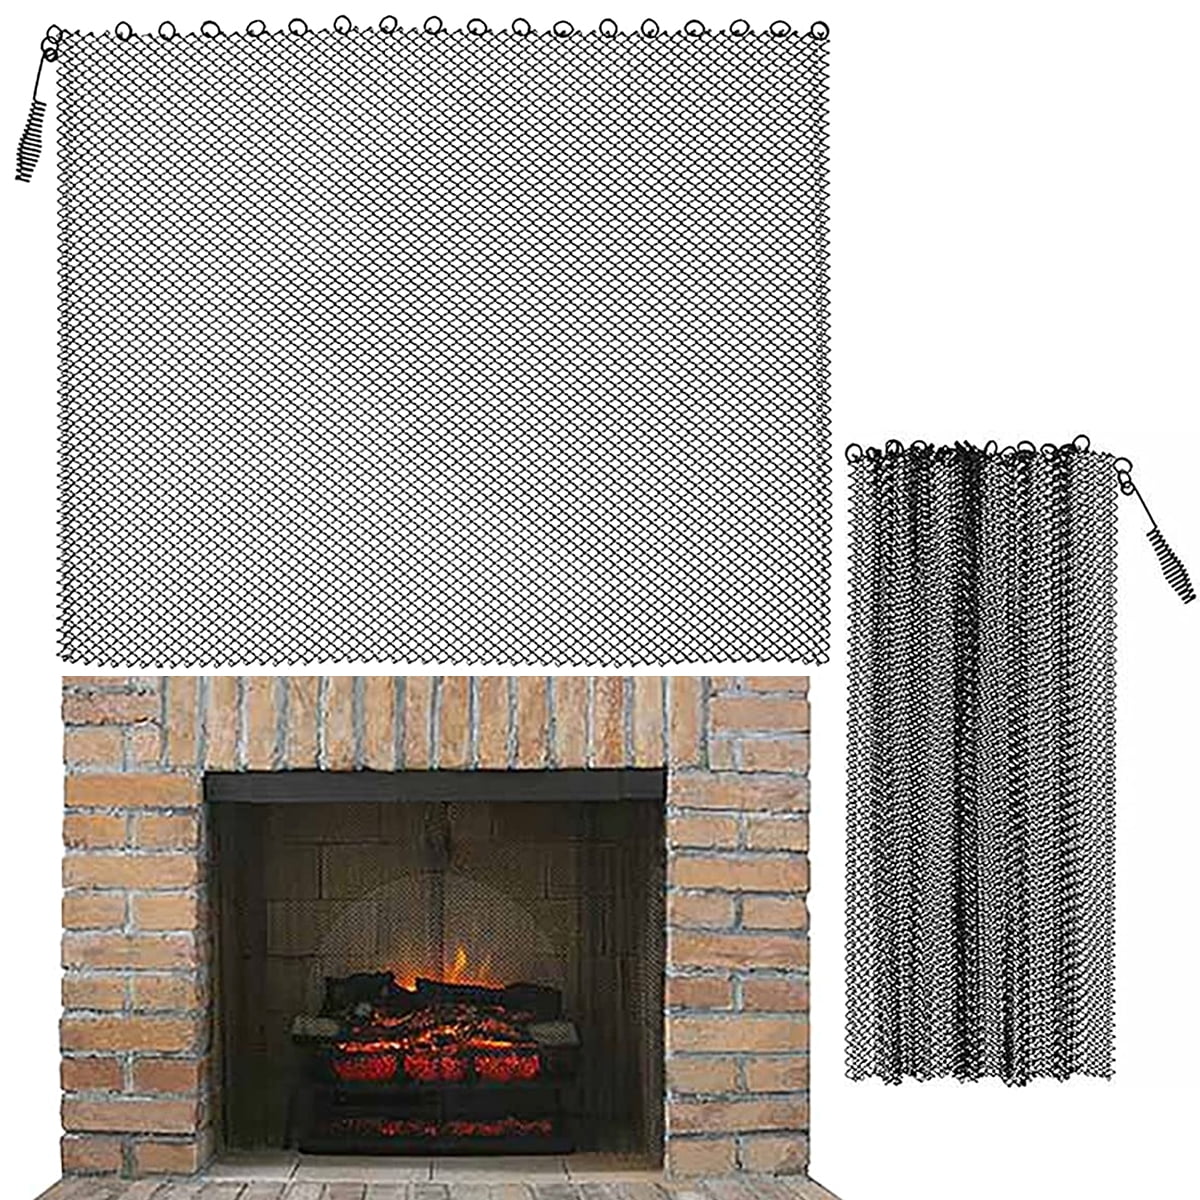 Toorise 2Pcs Fireplace Mesh Screen Curtain,Heat Resistant Fireplace Spark  Guard Curtain for Fireplace,ire Screen Single Panel,Easy  Installation,24×18/24×20/24×22inch 